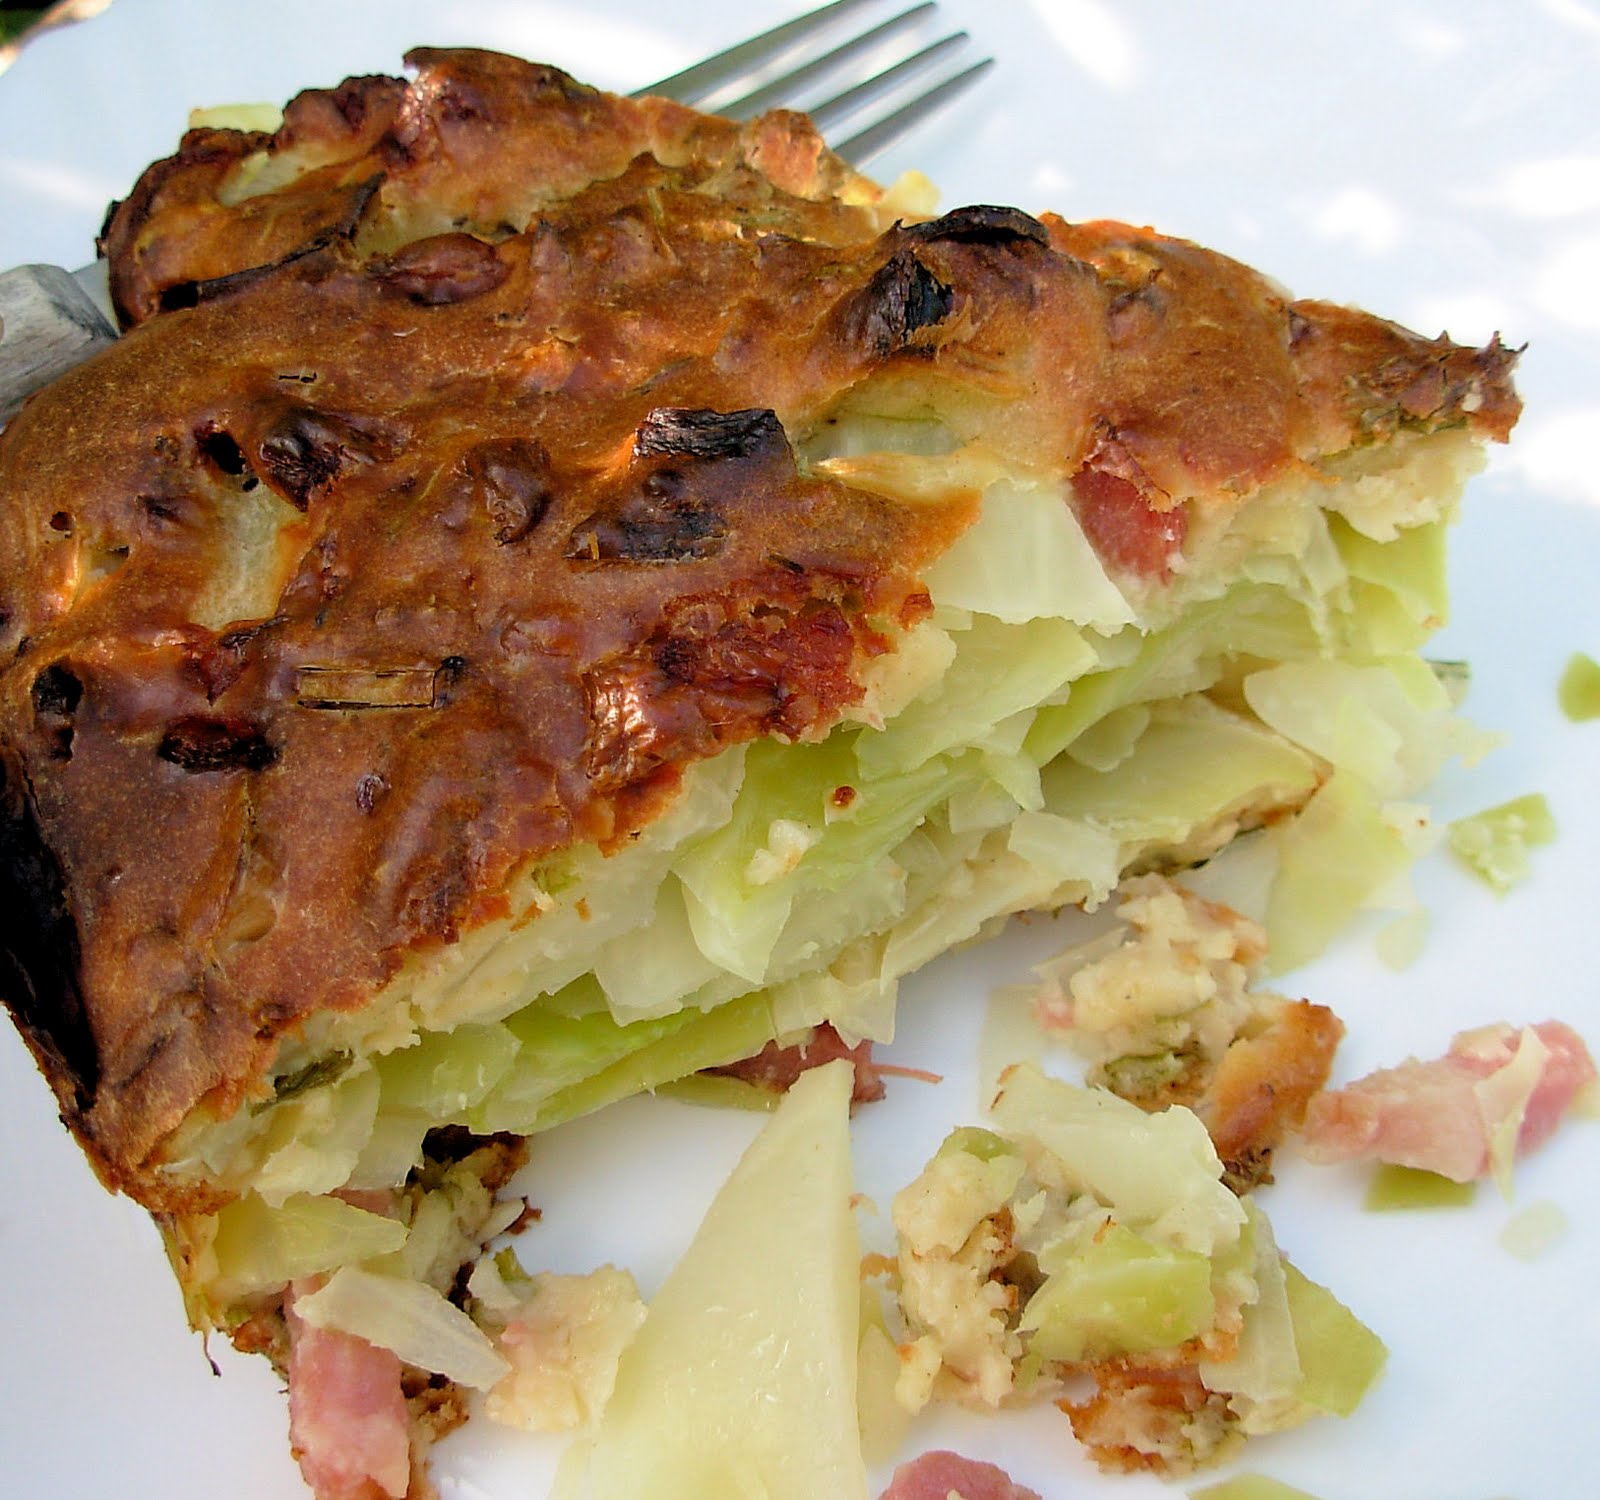 Rustic French Food, Cabbage and Galette au Chou